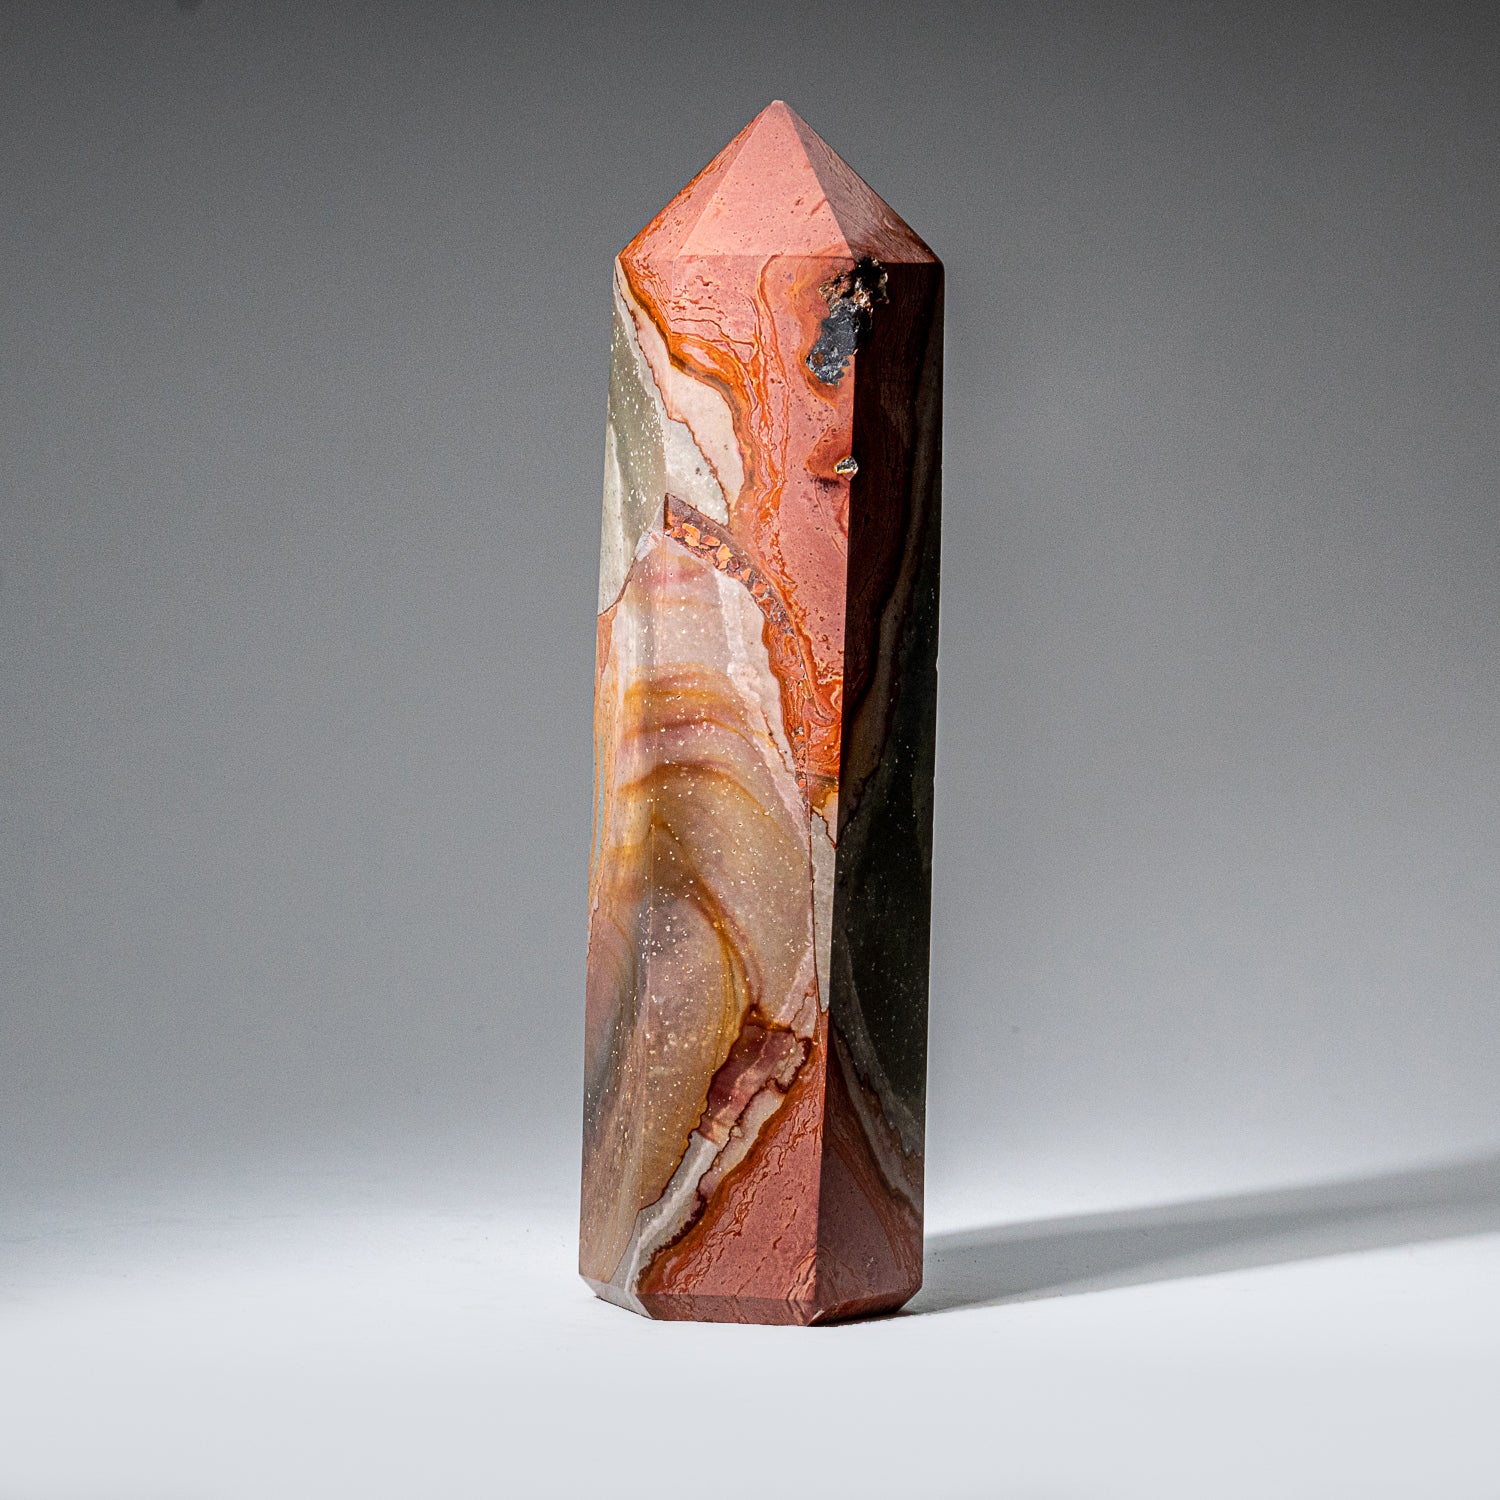 Polished Polychrome Point from Madagascar (1.8 lbs)